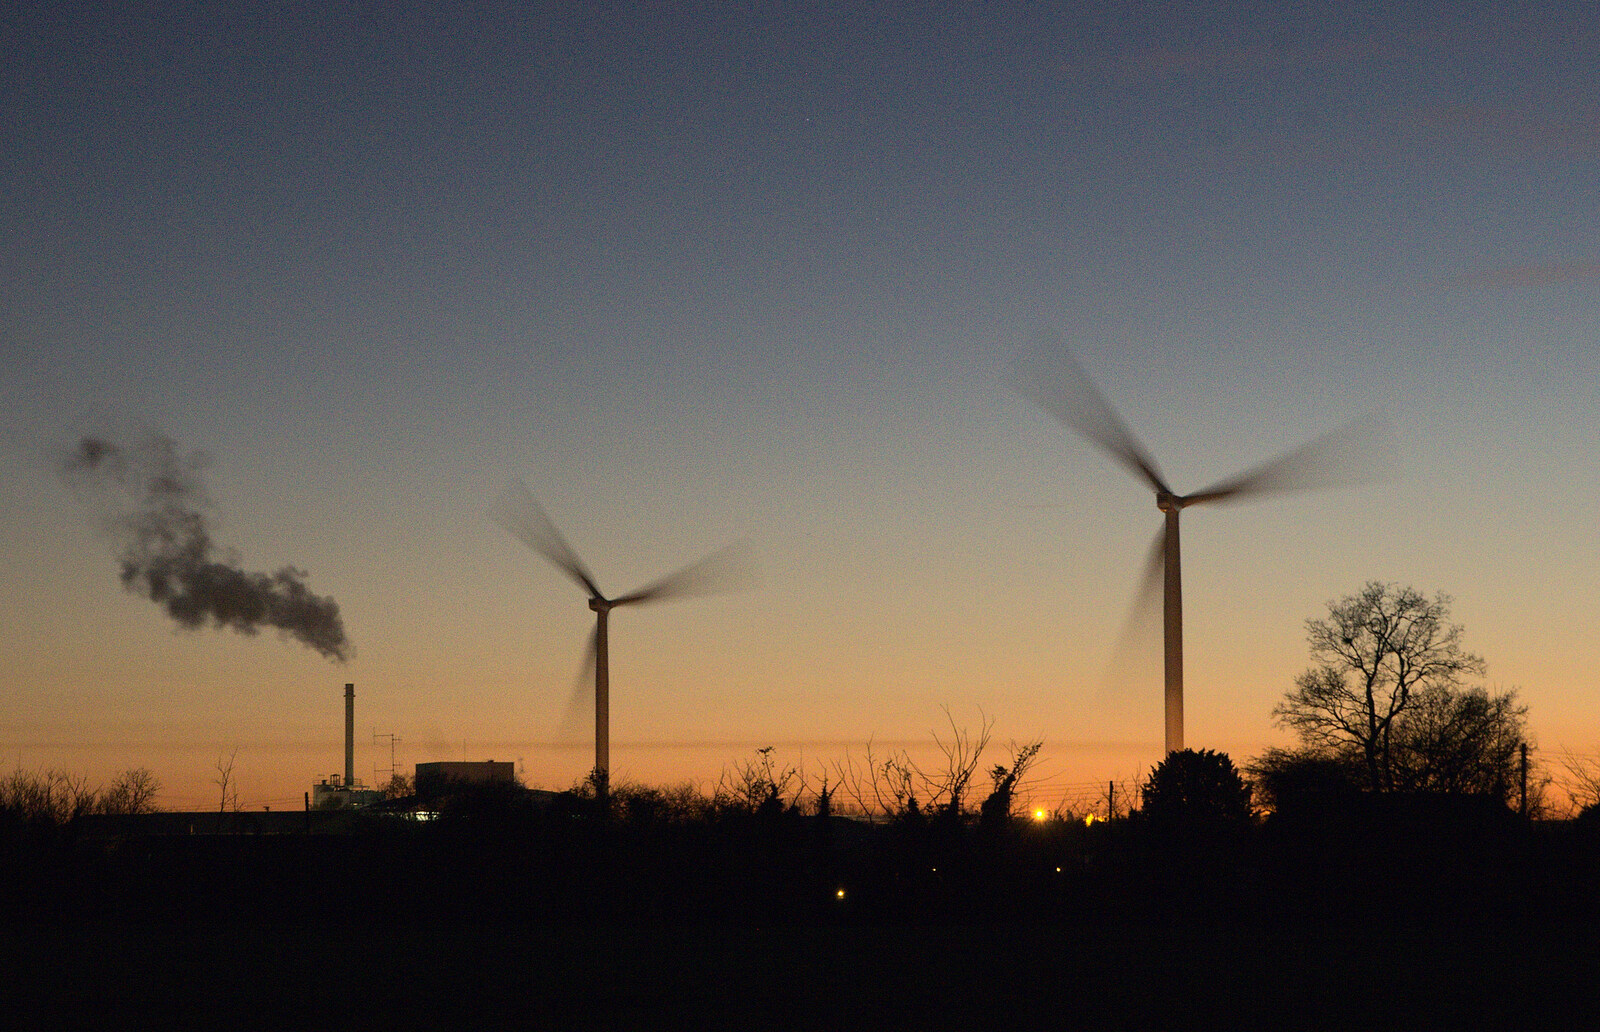 The wind turbines of Eye airfield from The Eye Lights and a Thorpe Abbots Birthday, Suffolk and Norfolk - 6th December 2014